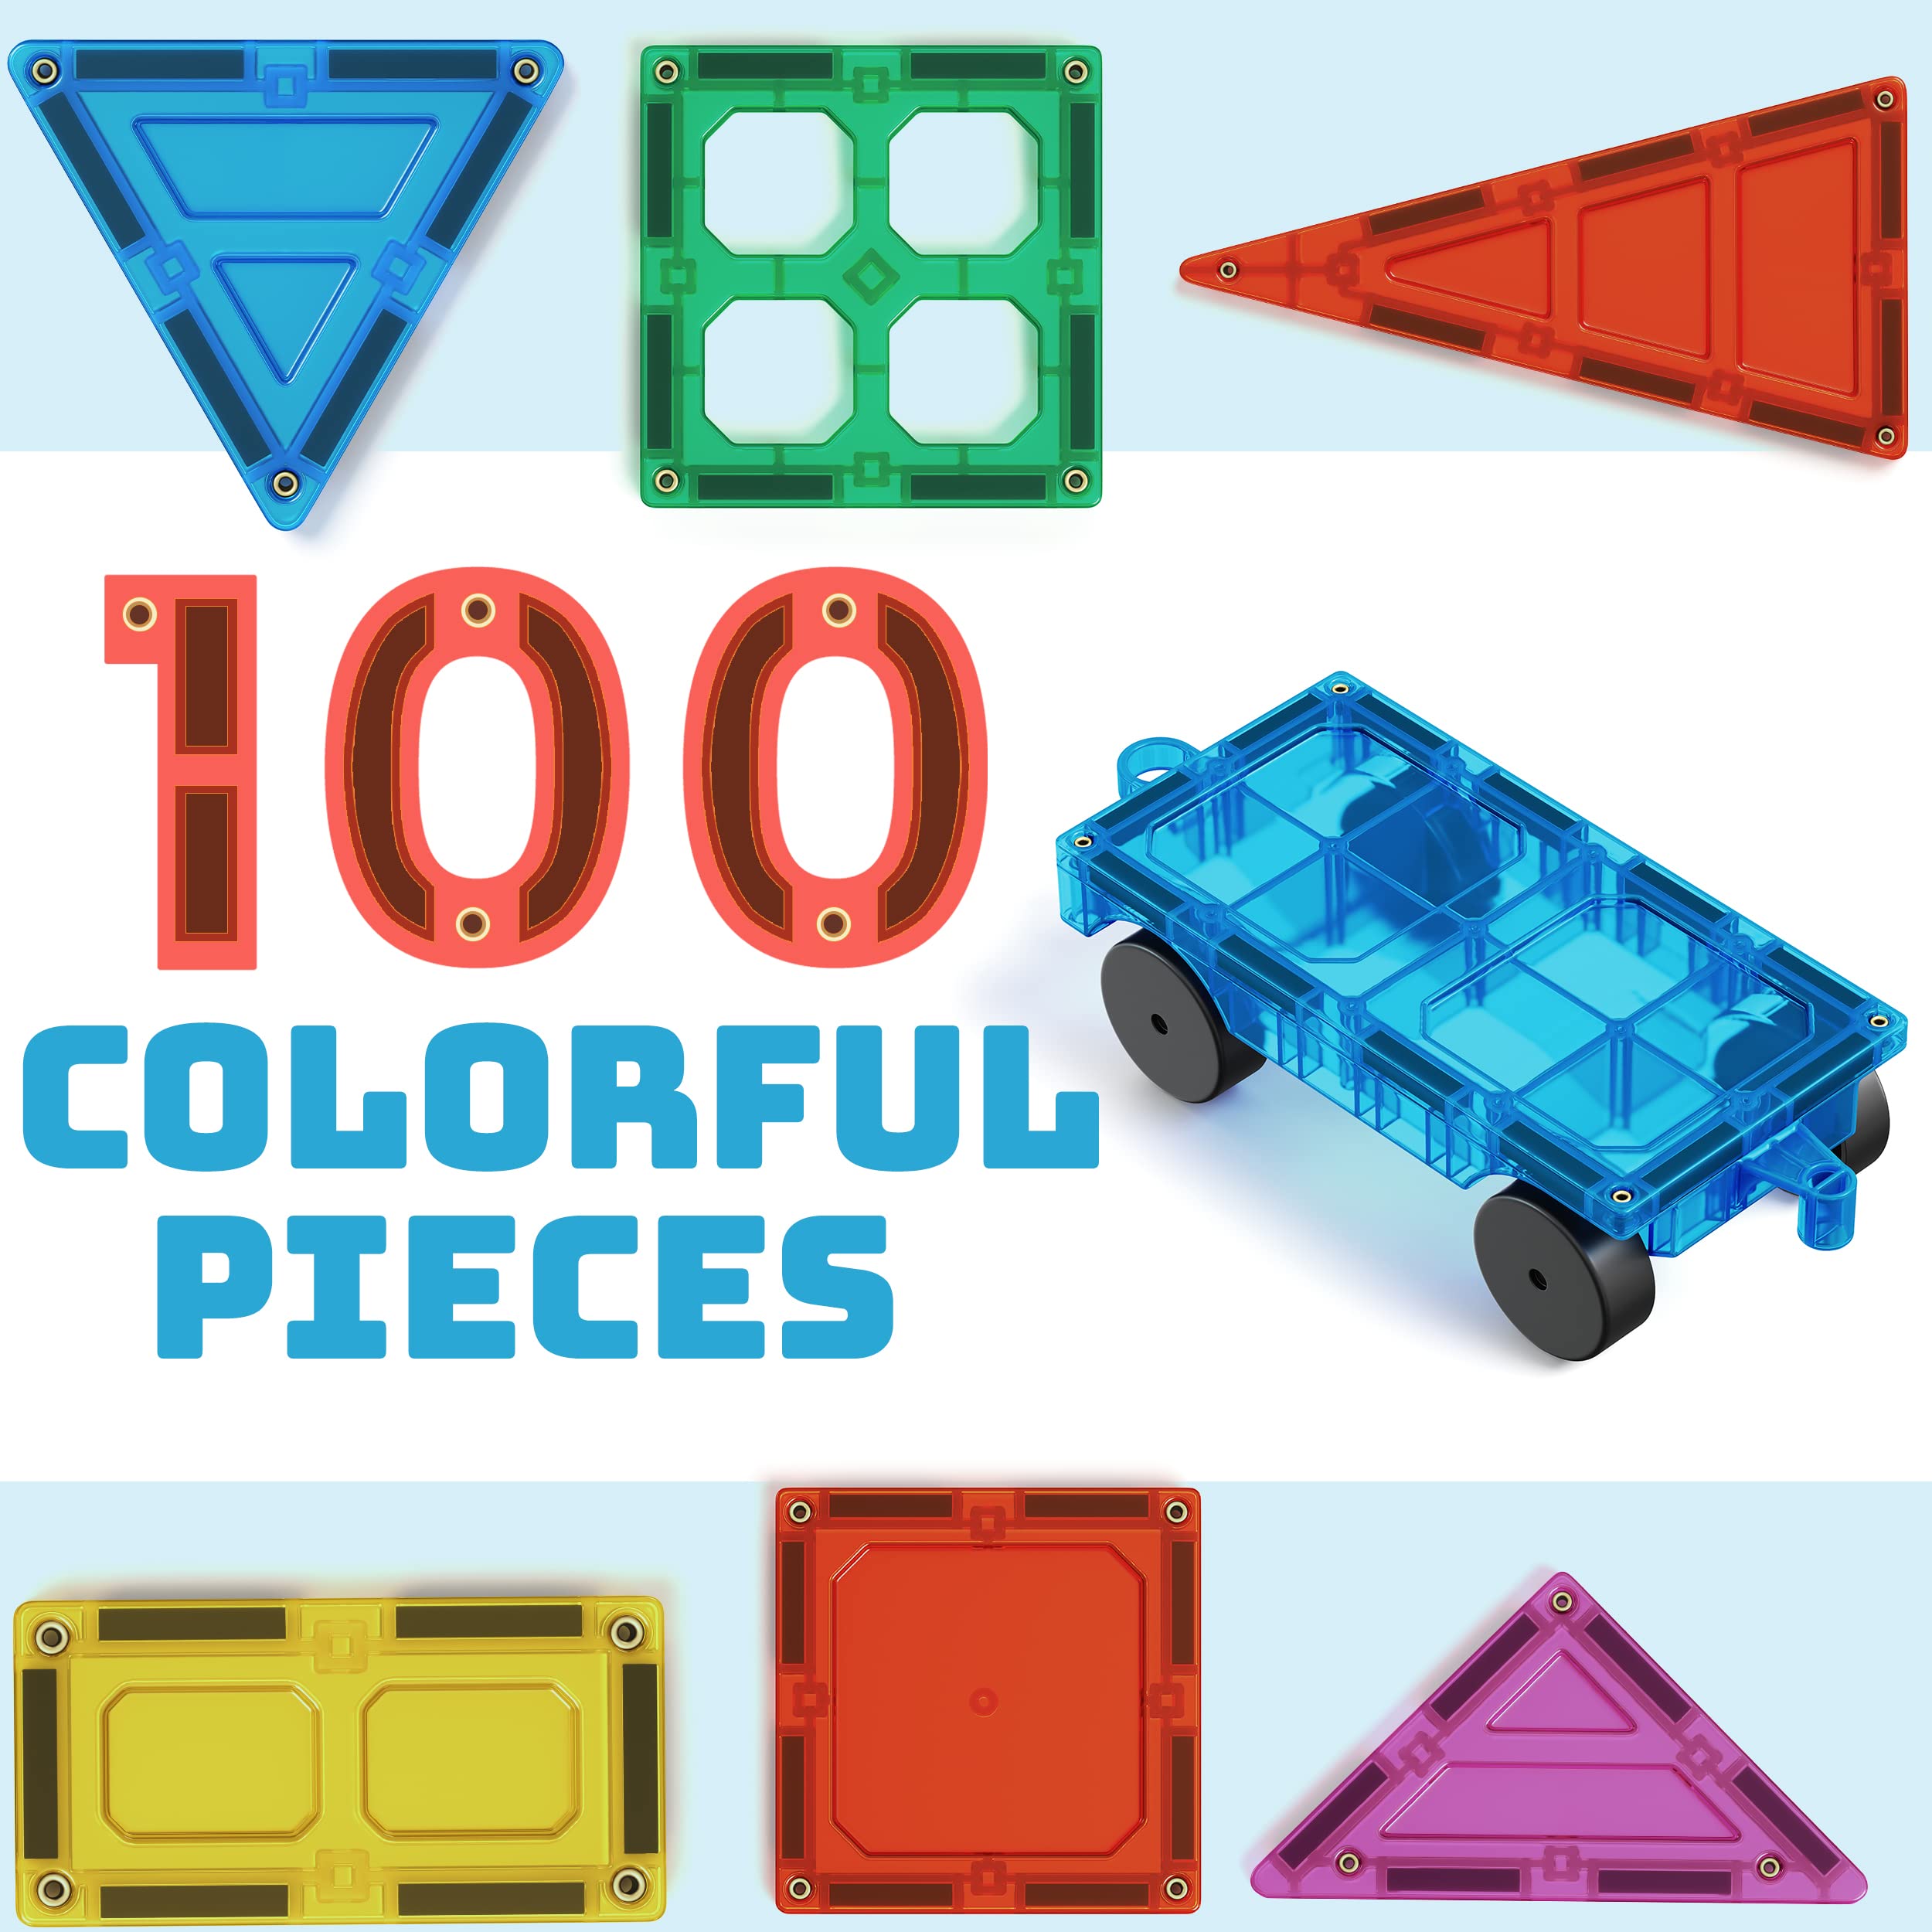 Magnet Build 100-Piece Extra Strong Magnetic Tiles Set - Magnets for Kids, 3D Tile Assorted Shapes & Colors, STEM Learning Toys for Ages 3+, Ideal Gift for Creative & Educational Play, Building Blocks